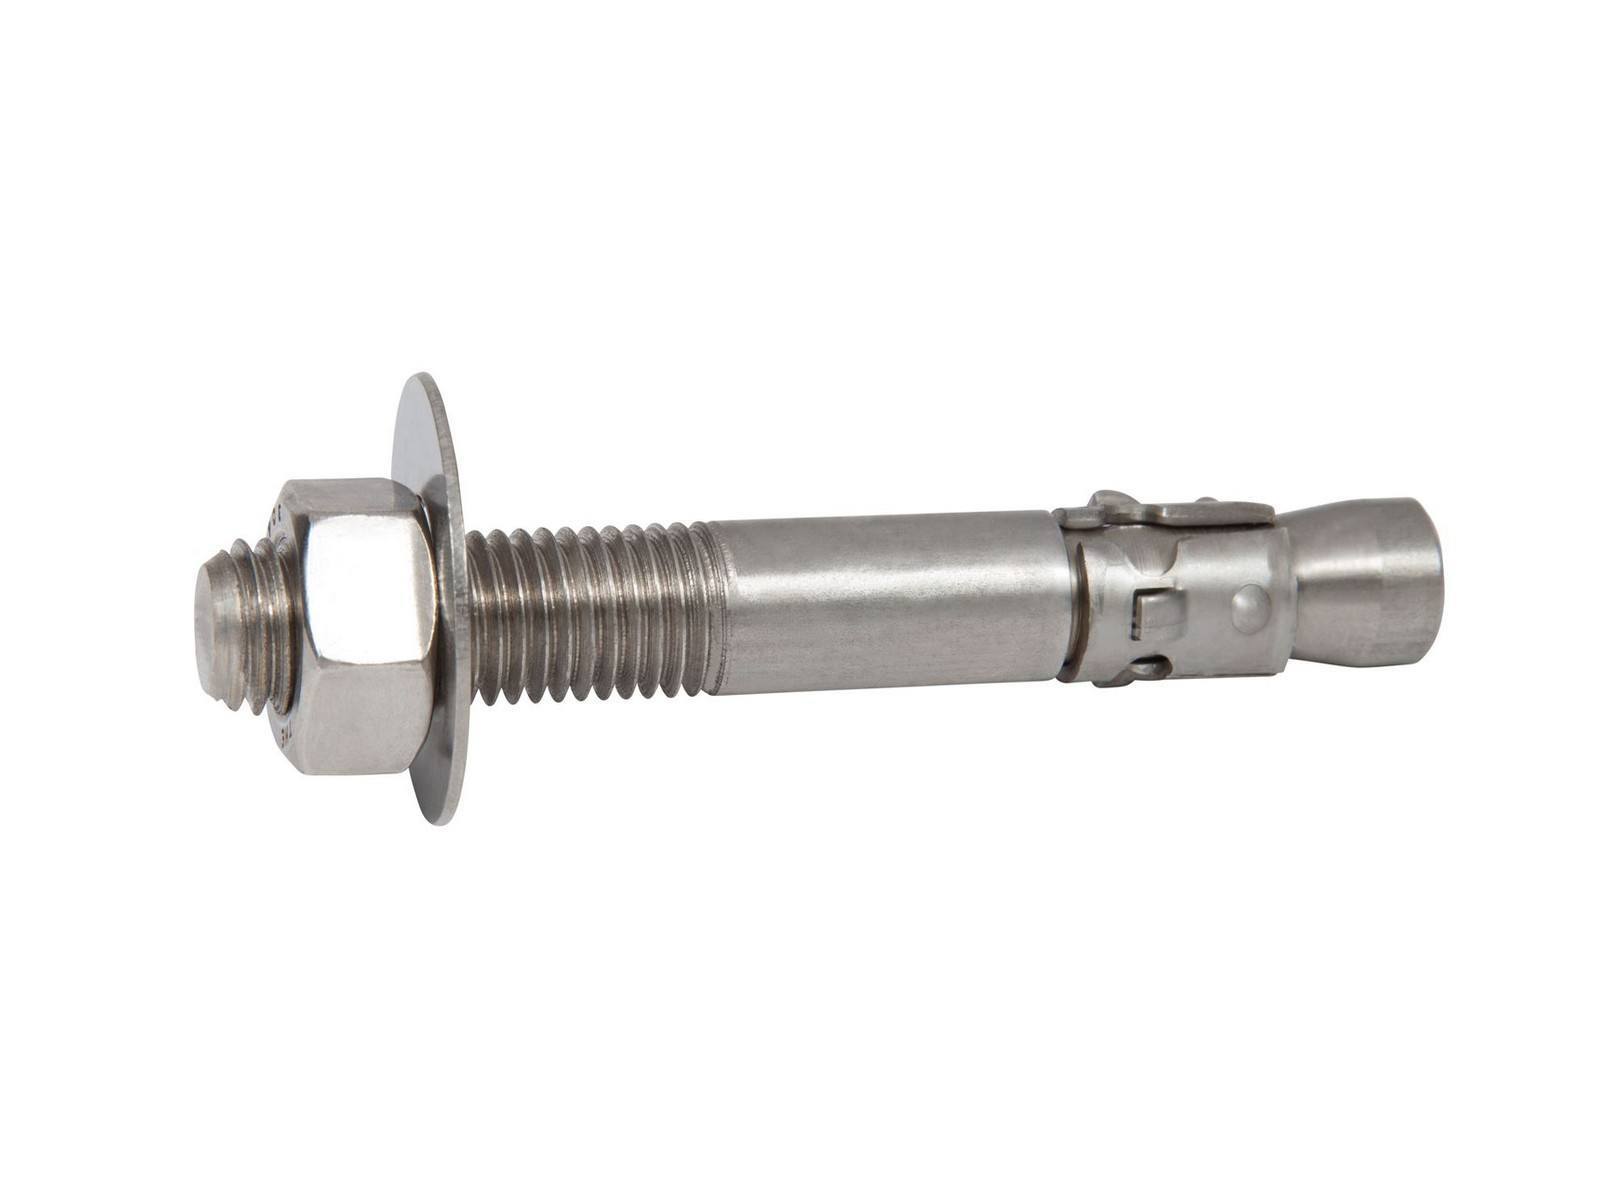 1/2" x 12" 316 Stainless Steel U.S. Made Thunderstud Anchor, 25/Box 1 2 Stainless Steel Concrete Anchors